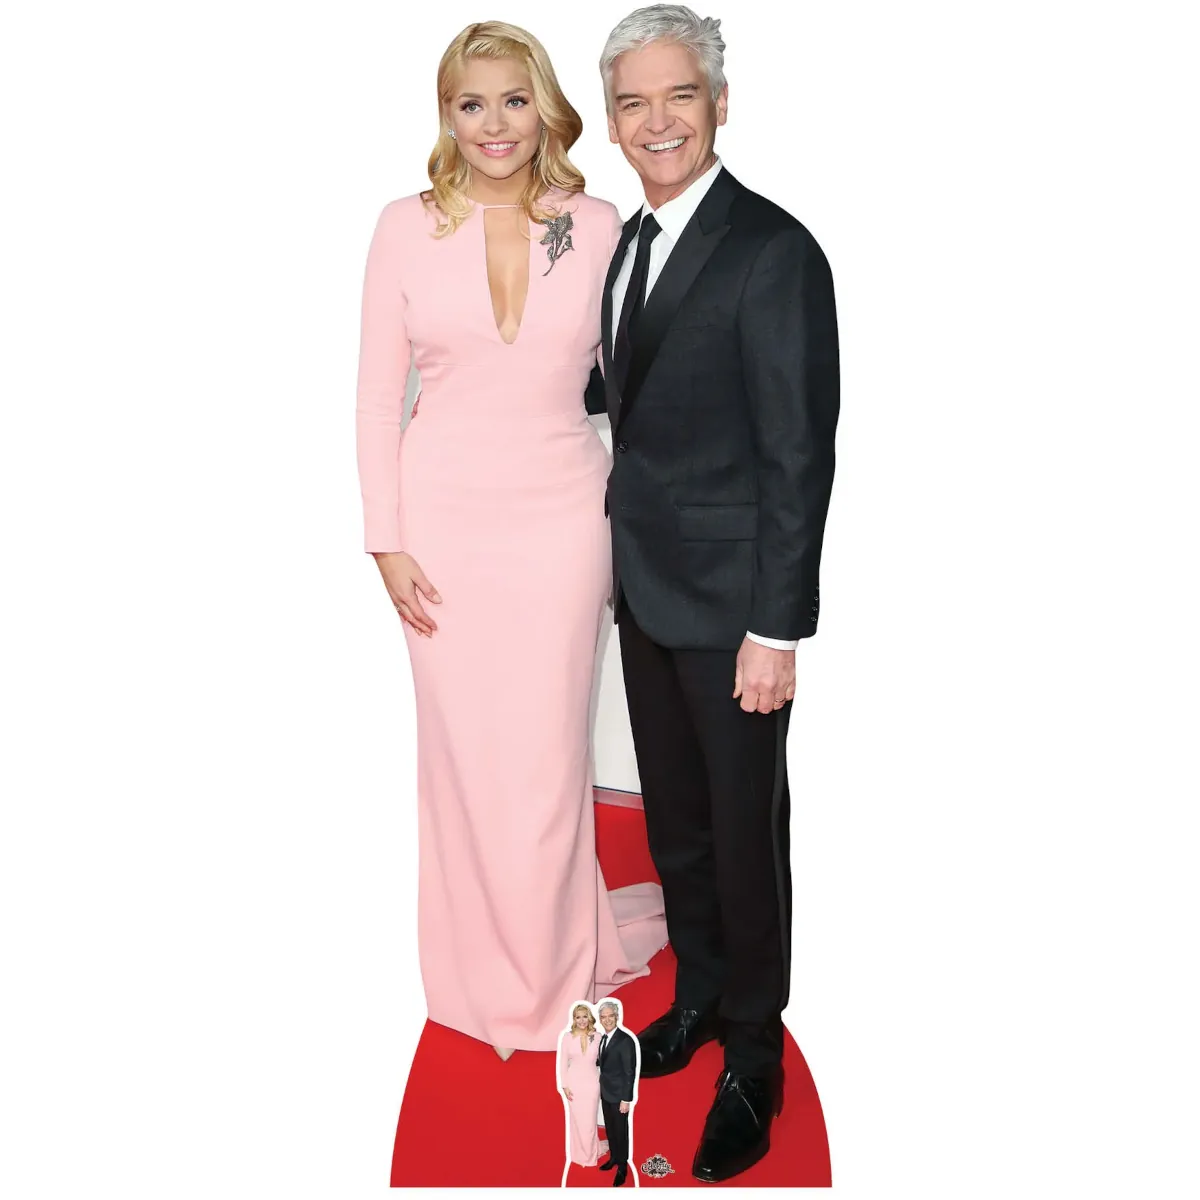 CS737 Holly Willoughby & Phillip Schofield (Television Presenters) Lifesize + Mini Cardboard Cutout Standee Front